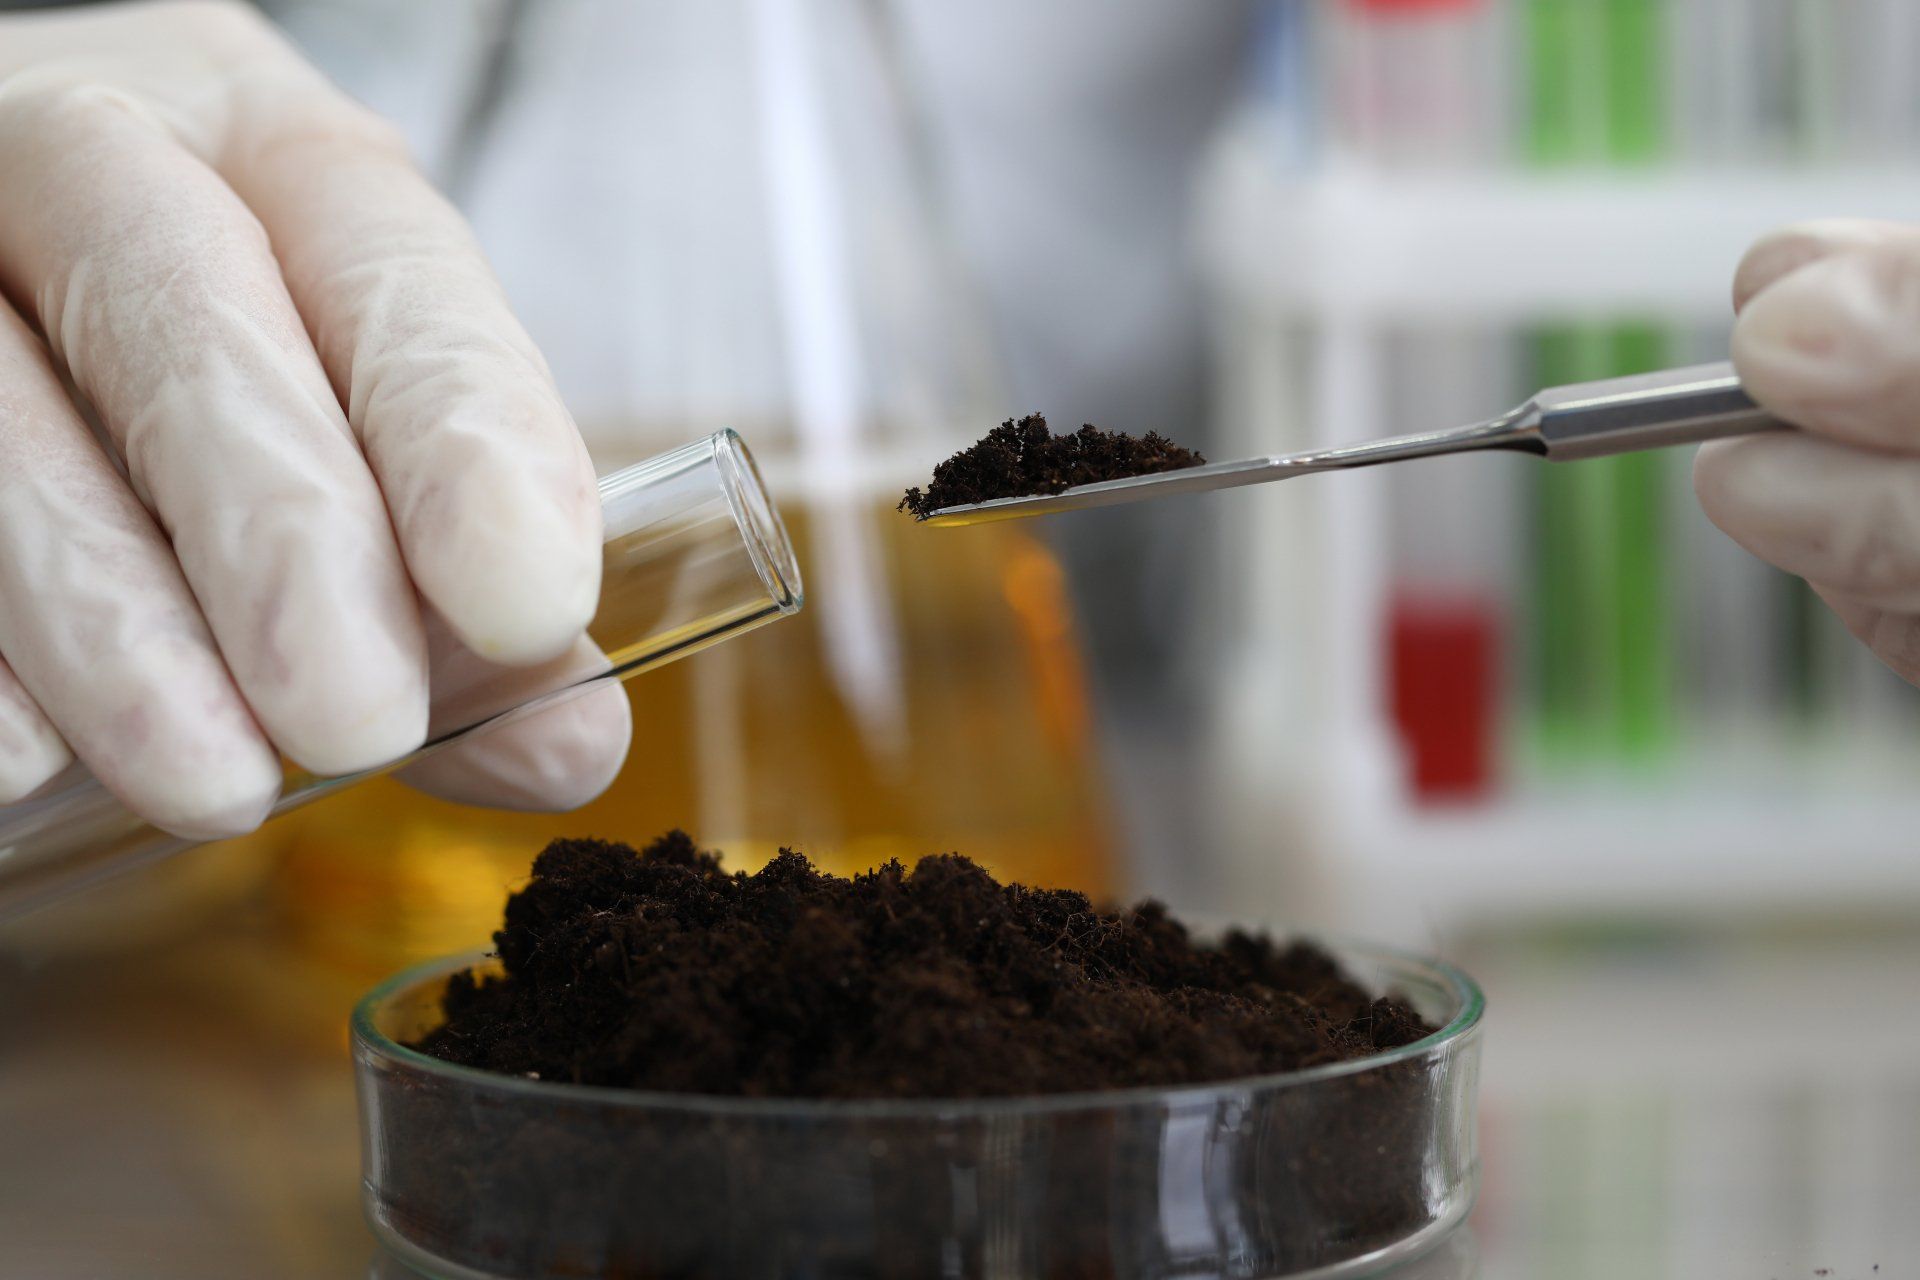 Soil Being Scooped into Test Tube for Examination